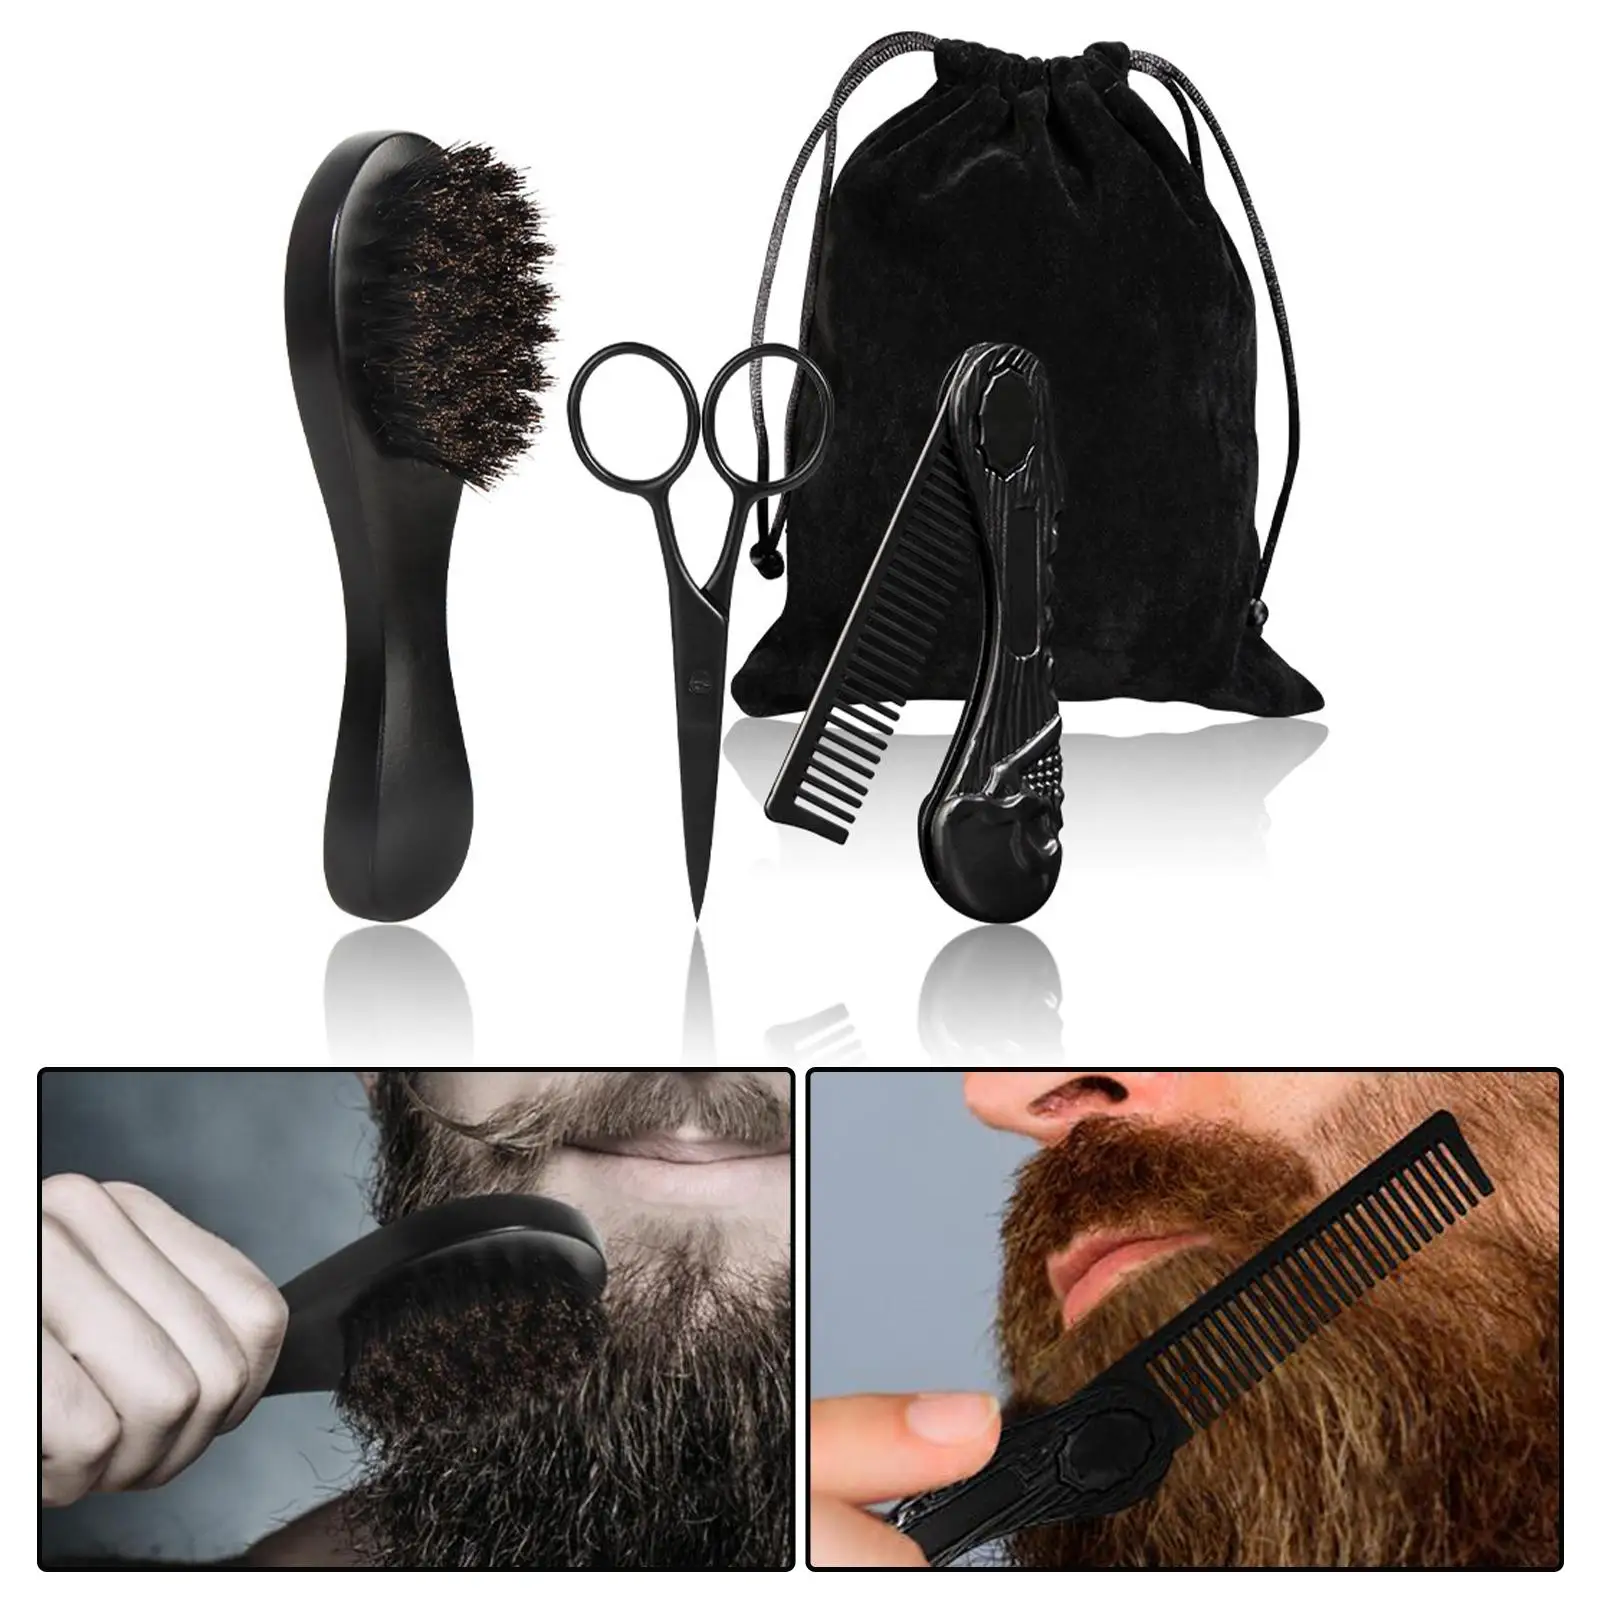 3x Men Beard Care Kit Wooden Comb Mustache Scissors for Travel Cleaning Grooming Tool